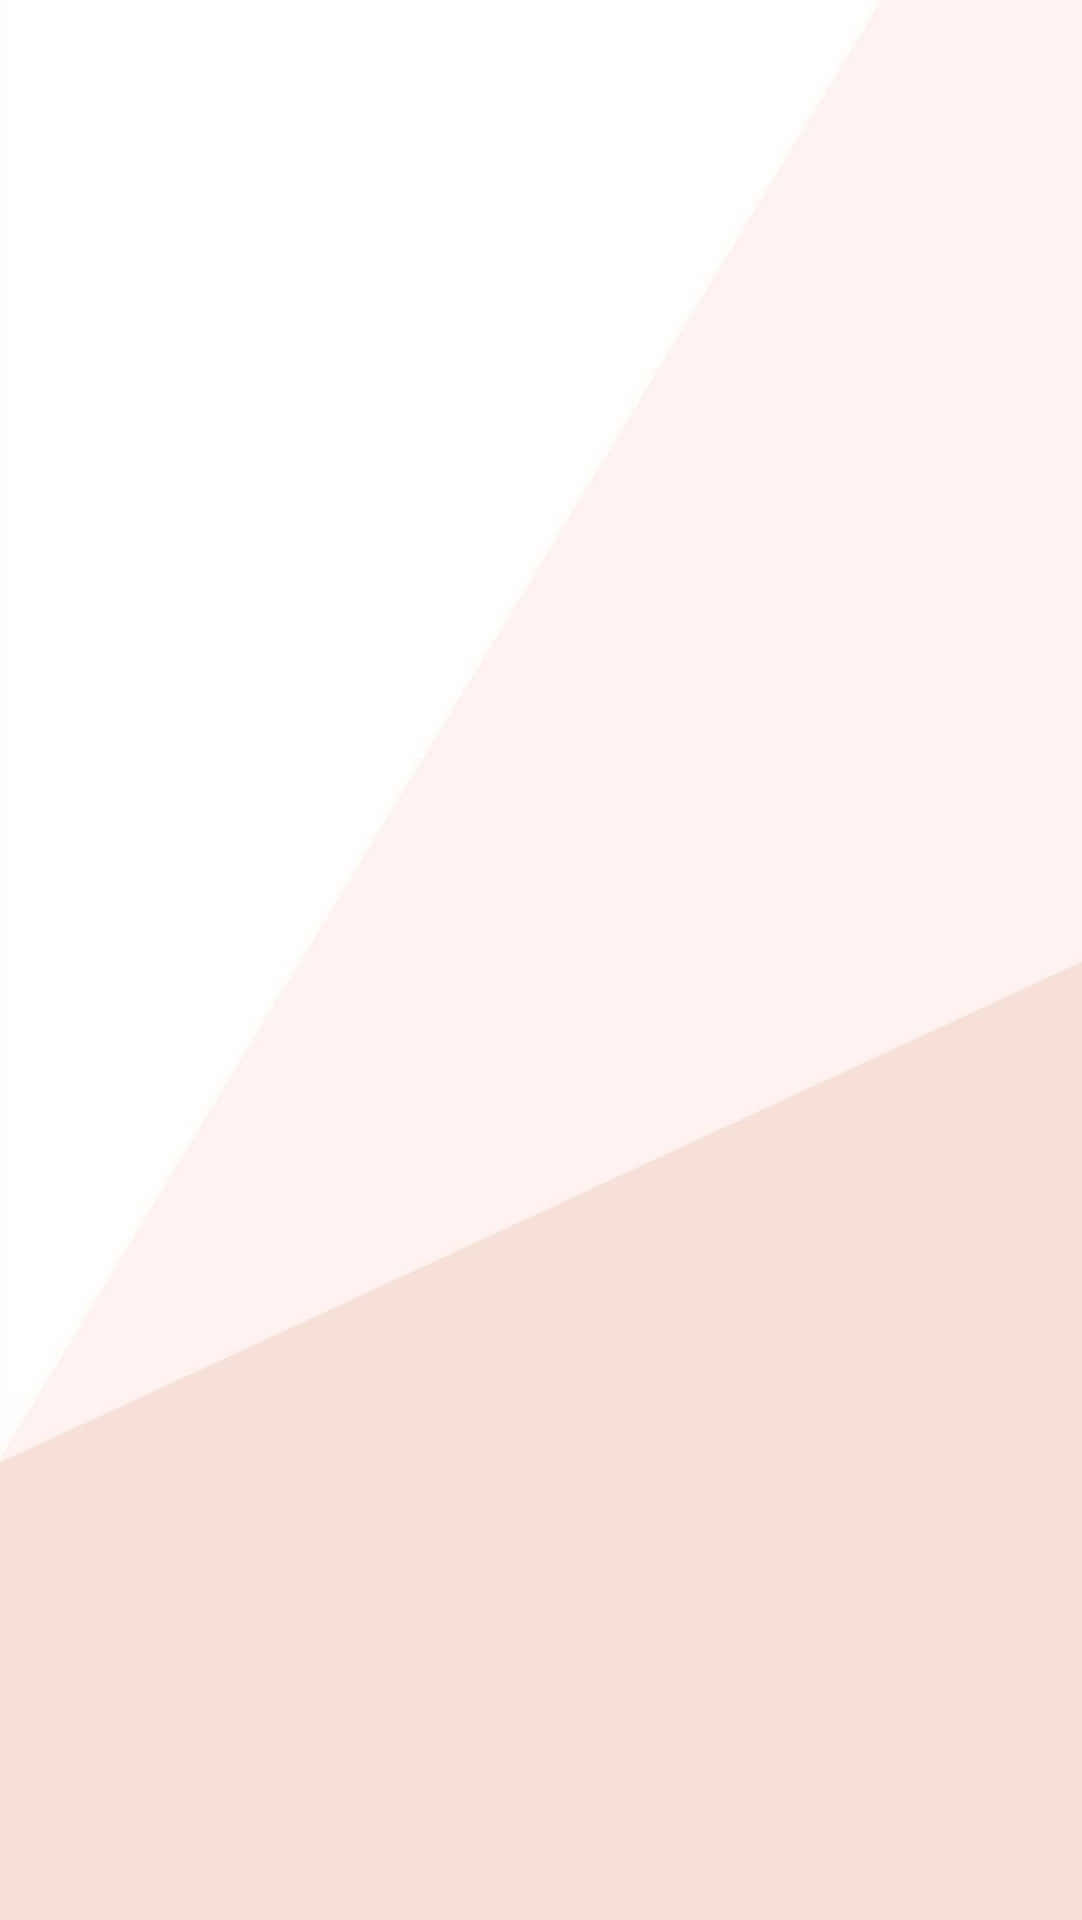 A Pink And White Background With A Triangle Wallpaper